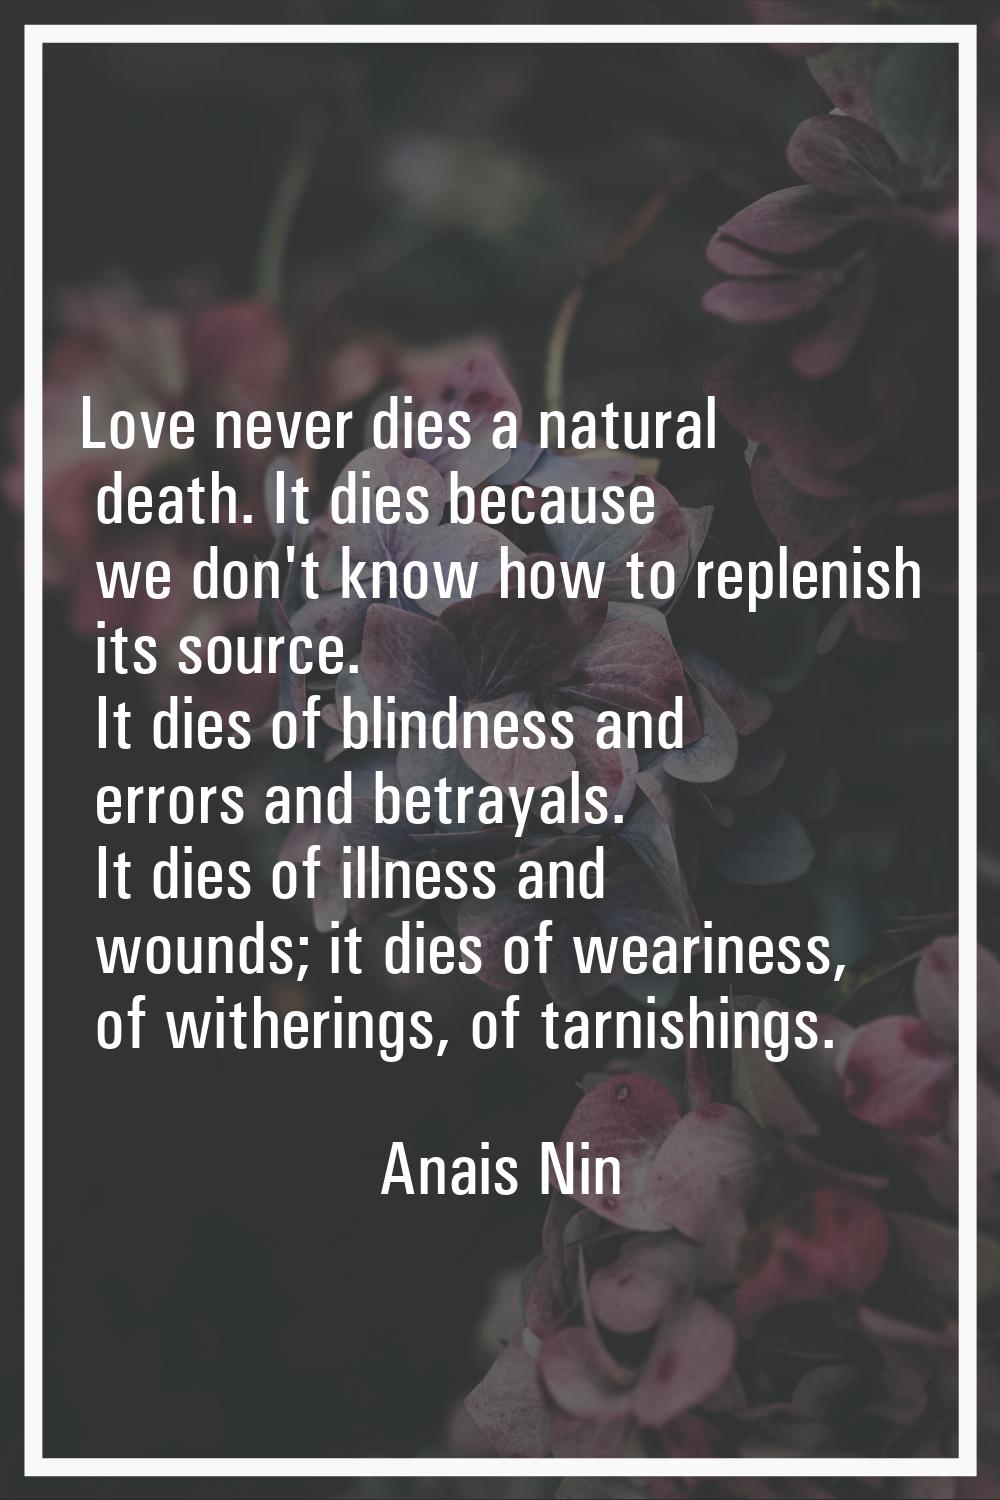 Love never dies a natural death. It dies because we don't know how to replenish its source. It dies